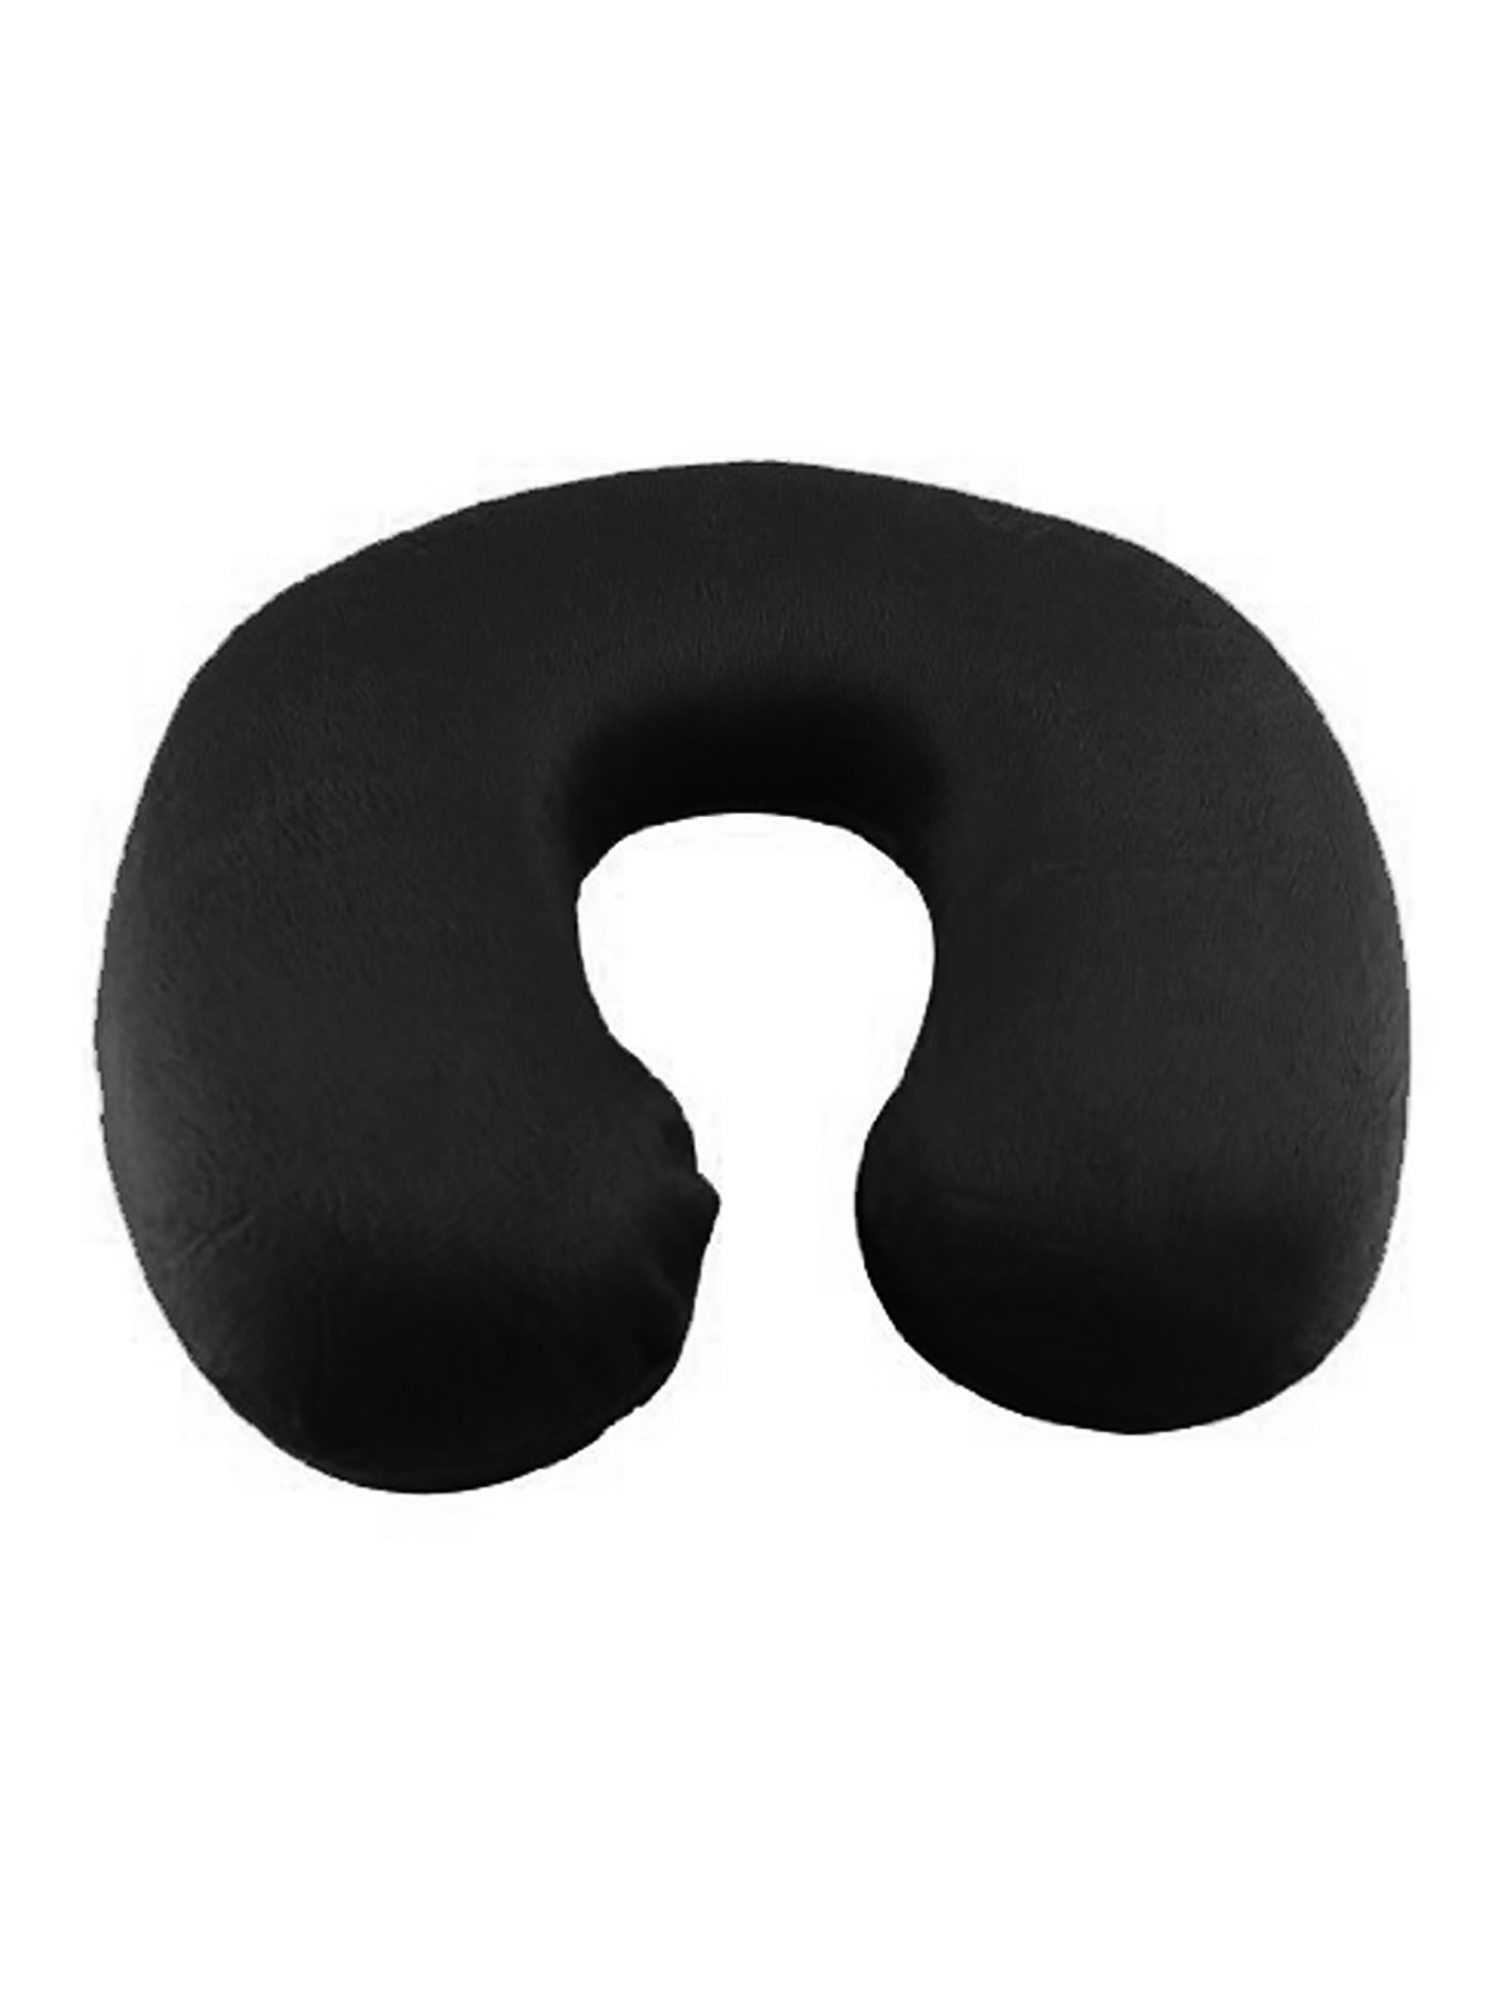 Travel Pillow Memory Foam Neck Cushion Support Rest Outdoors Car Flight - image 2 of 3